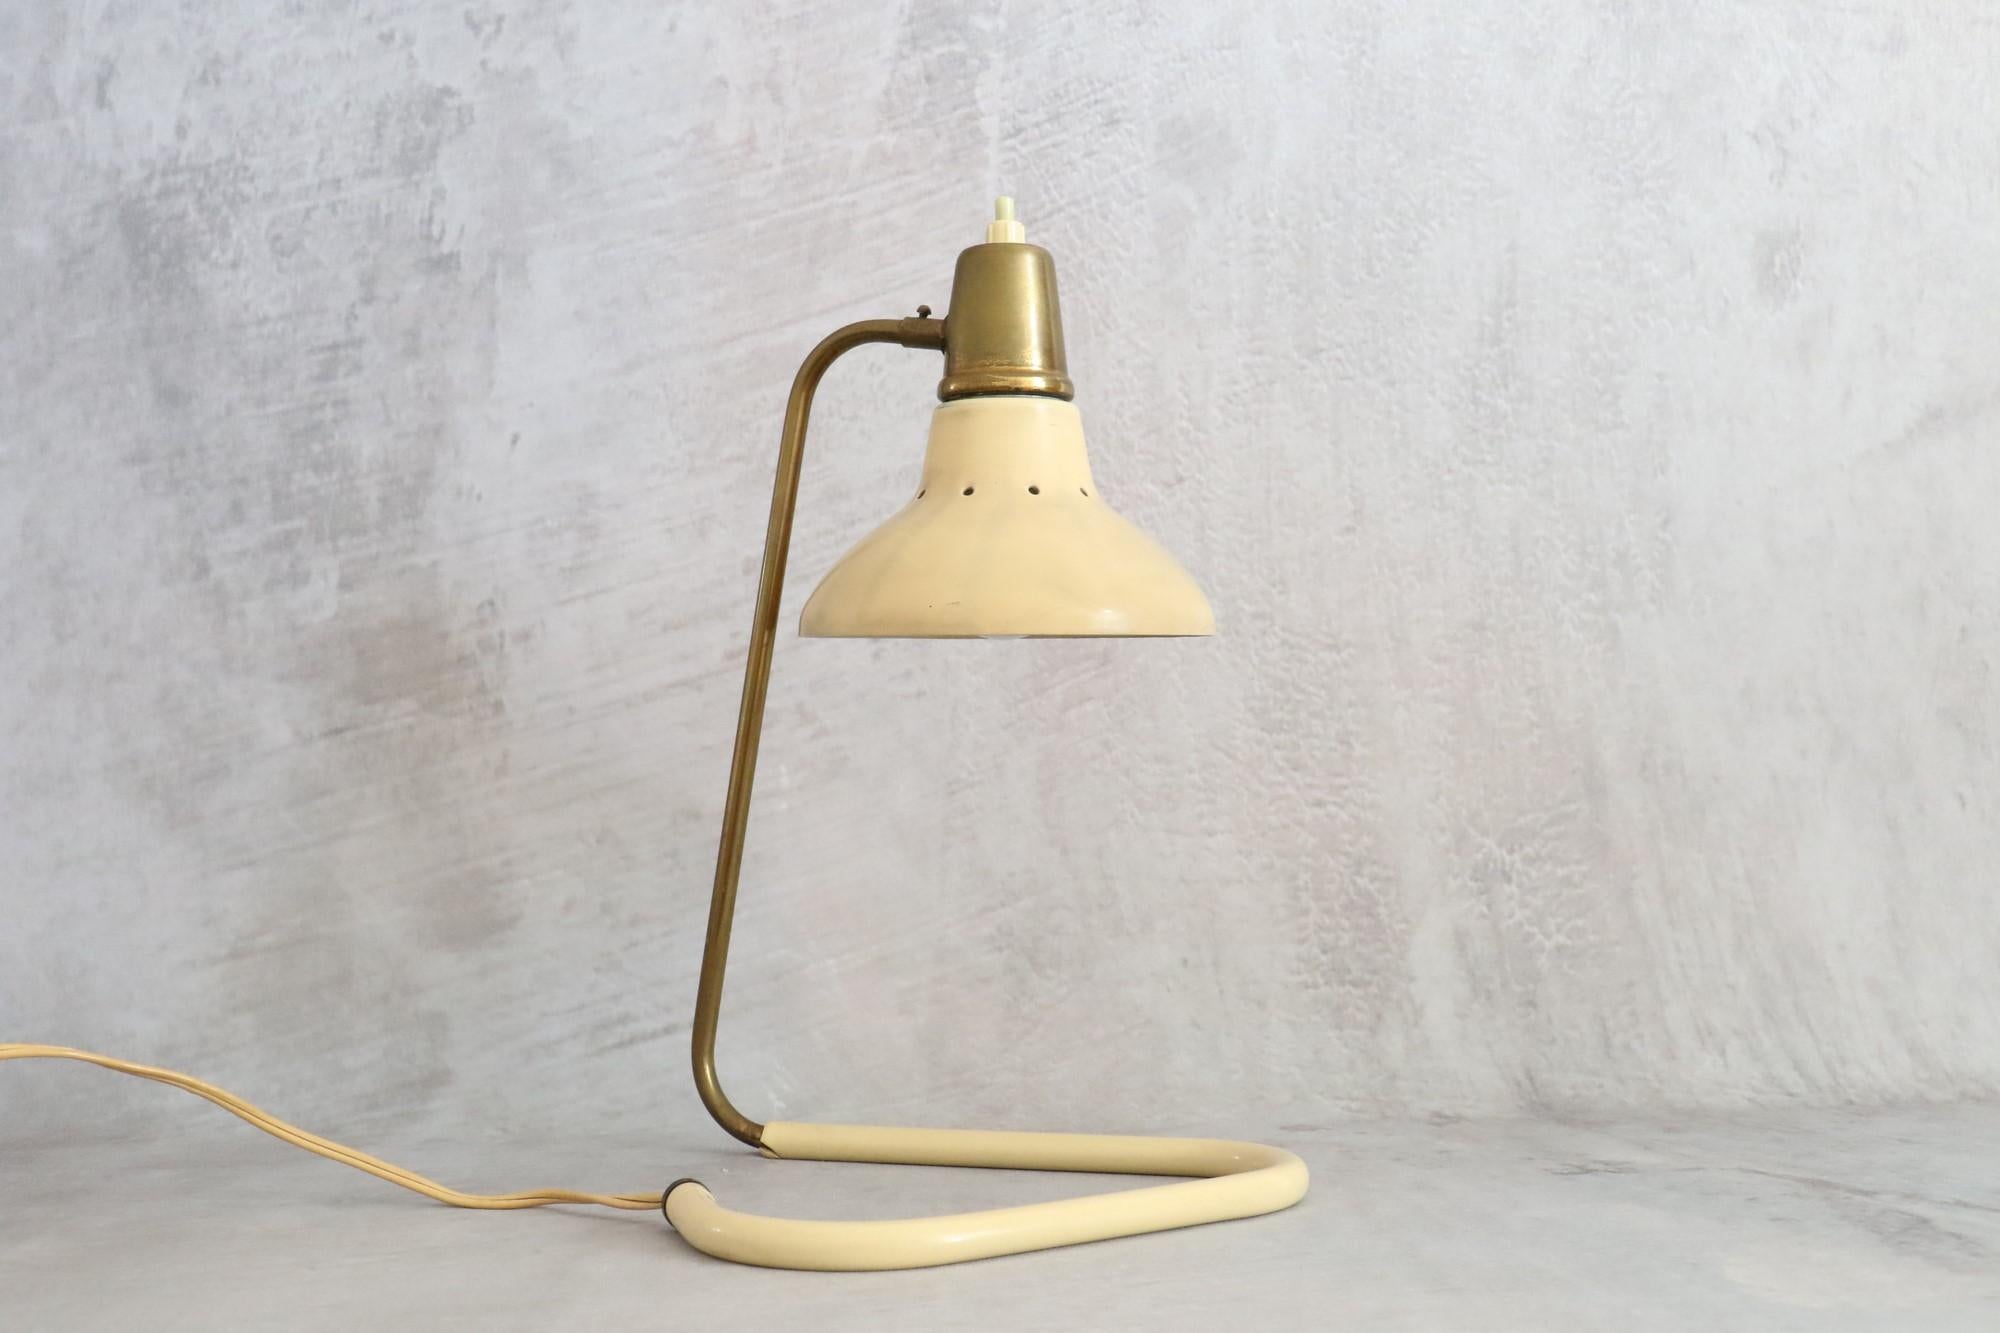 Robert Caillat Mid-Century Modern French table lamp 1950 era Biny Guariche

Very nice desk lamp. Emblematic of the design of the 50's lighting fixtures it is a very nice lamp in gold brass and beige reflector.

The lamp is in fair condition with